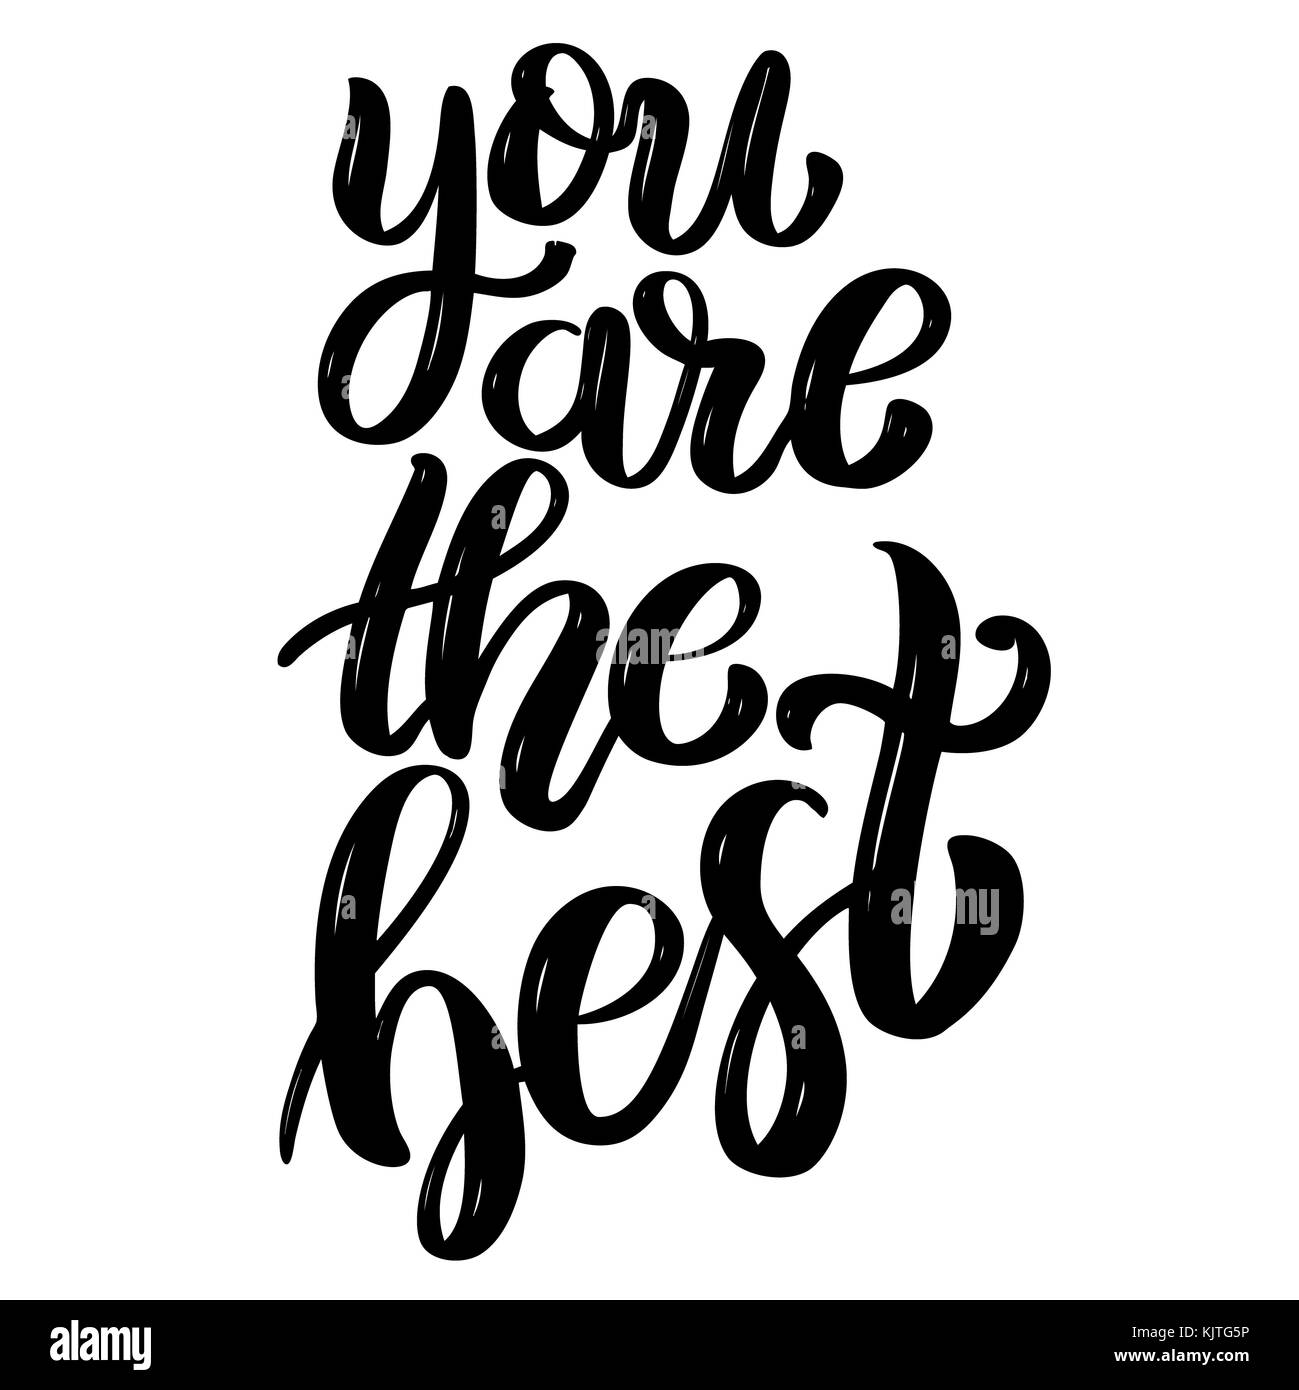 You are the best. Hand drawn motivation lettering quote. Design element for poster, banner, greeting card. Vector illustration Stock Photo